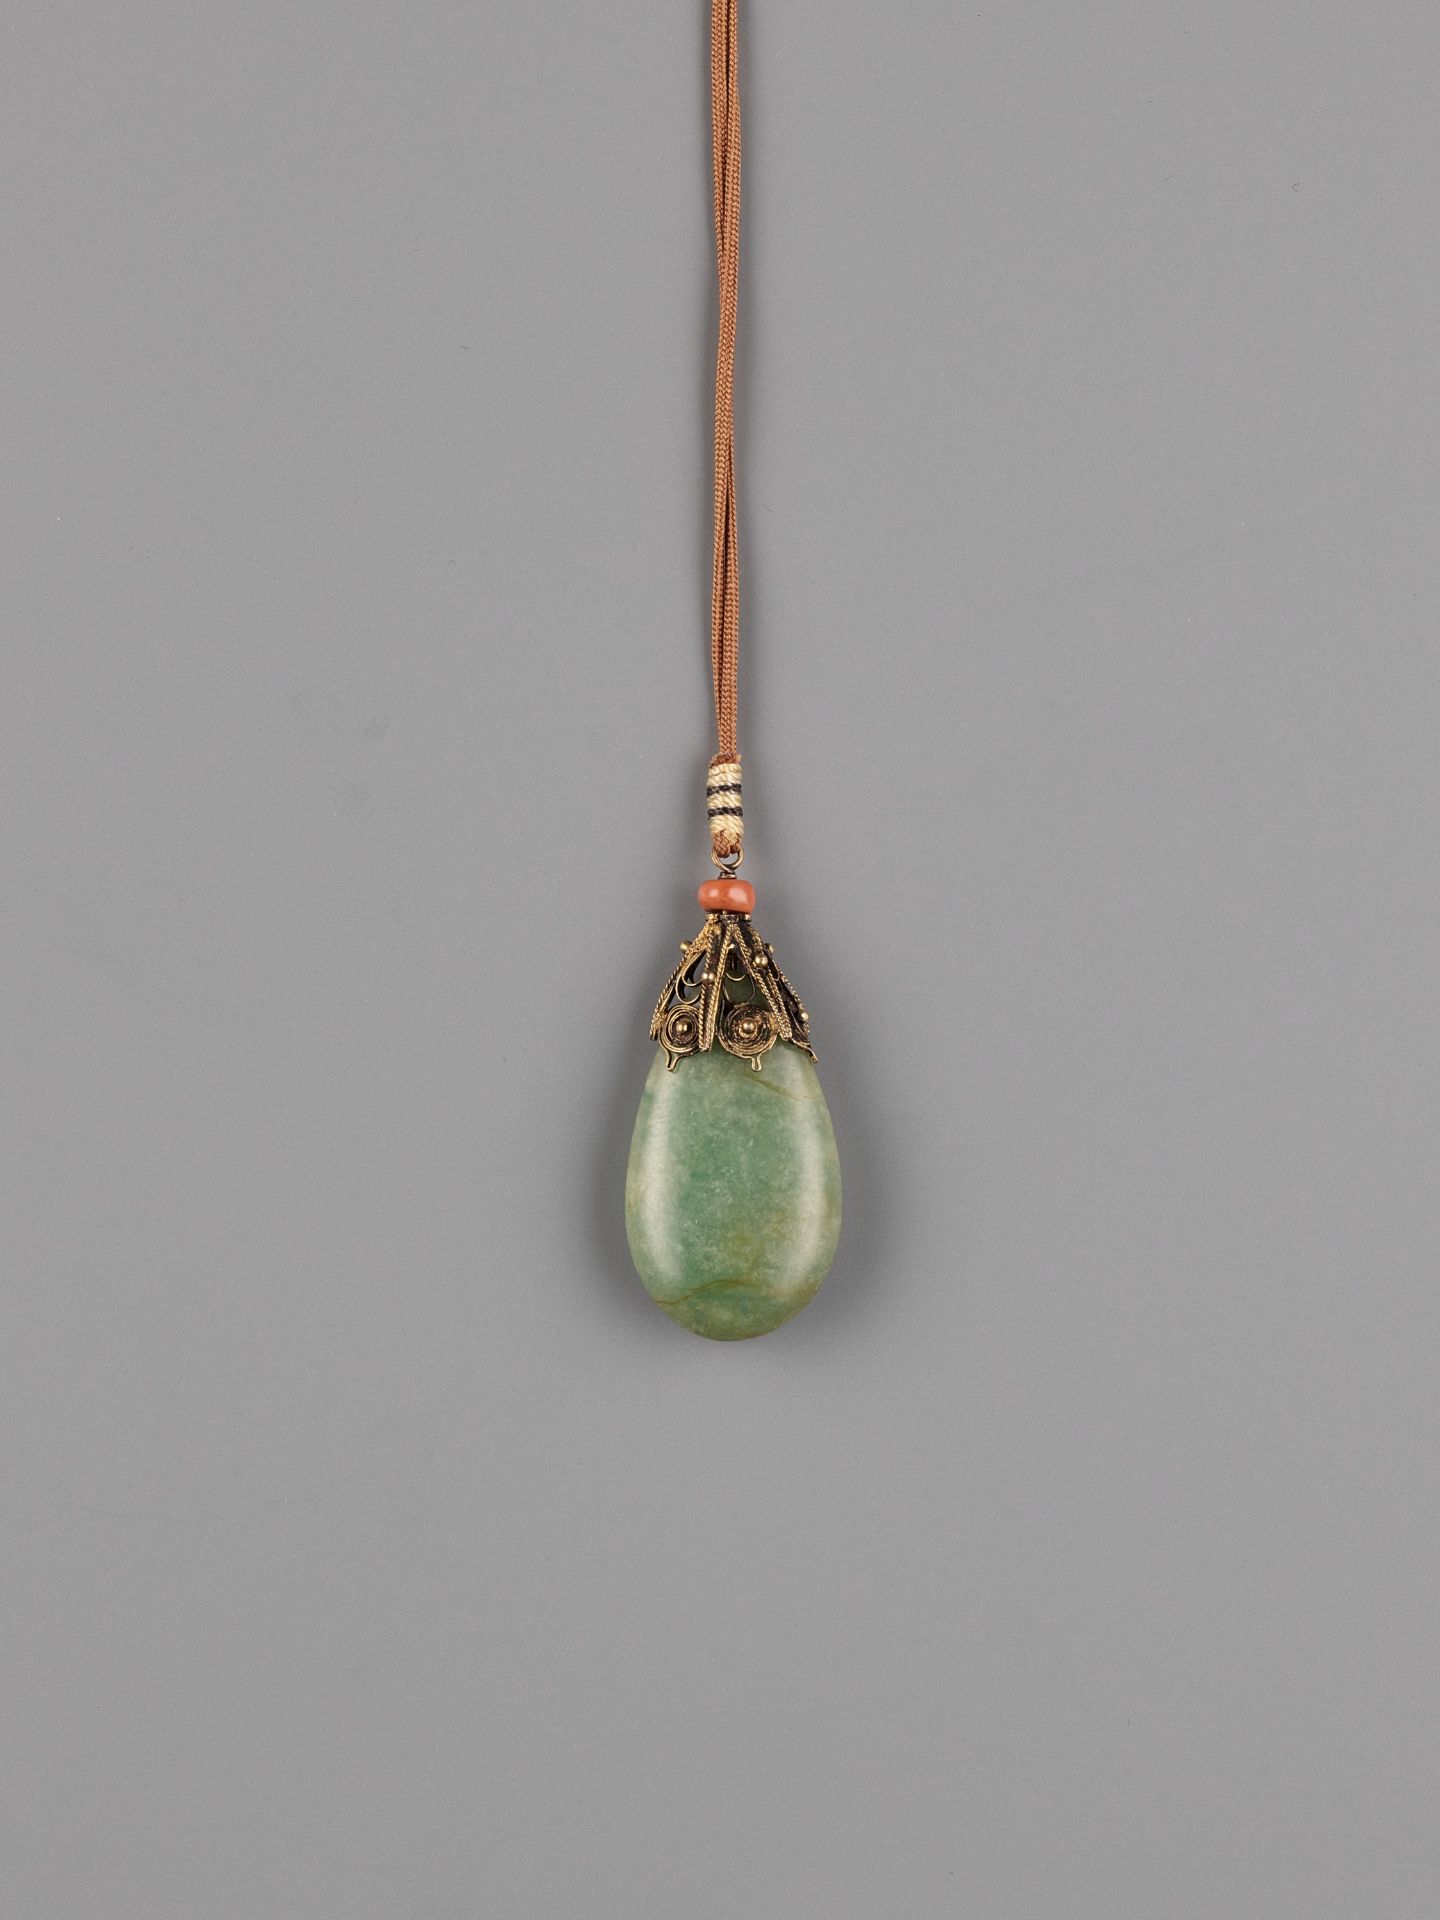 AN AMBER AND JADEITE COURT NECKLACE (CHAO ZHU), QING DYNASTY - Image 3 of 7